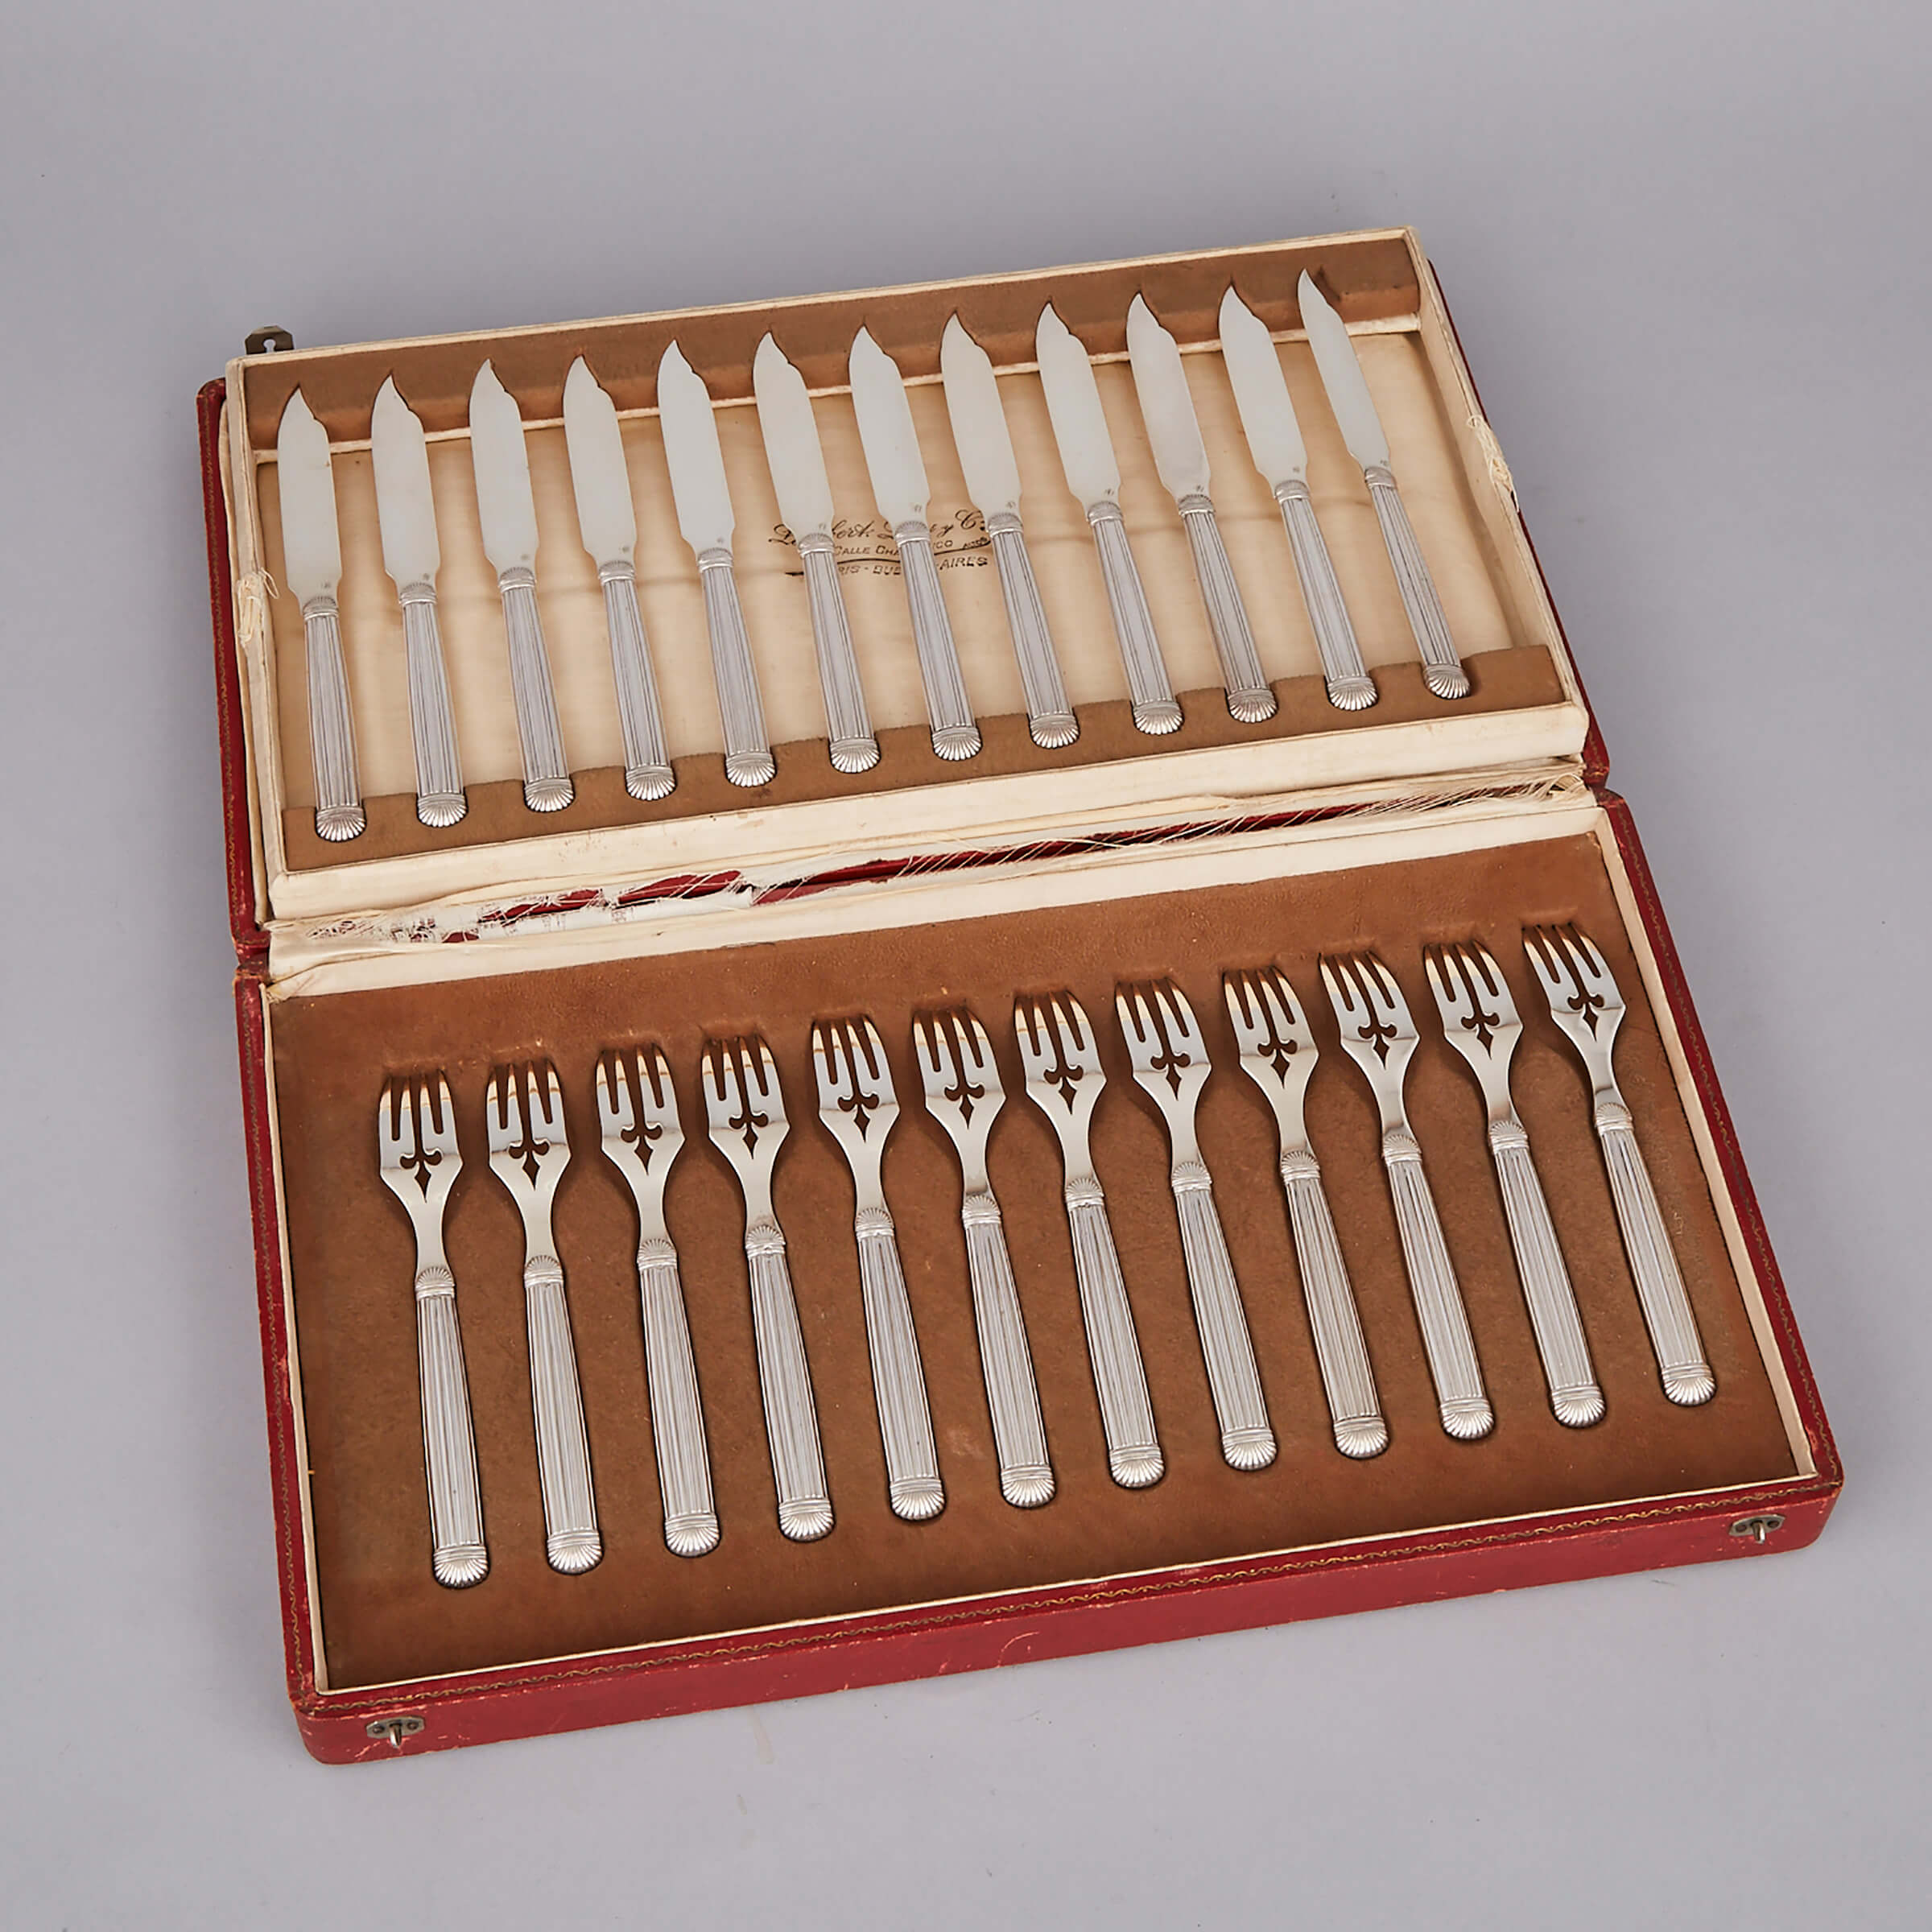 Twelve French Silver Fish Knives and Twelve Forks, Alphonse Debain, Paris, early 20th century